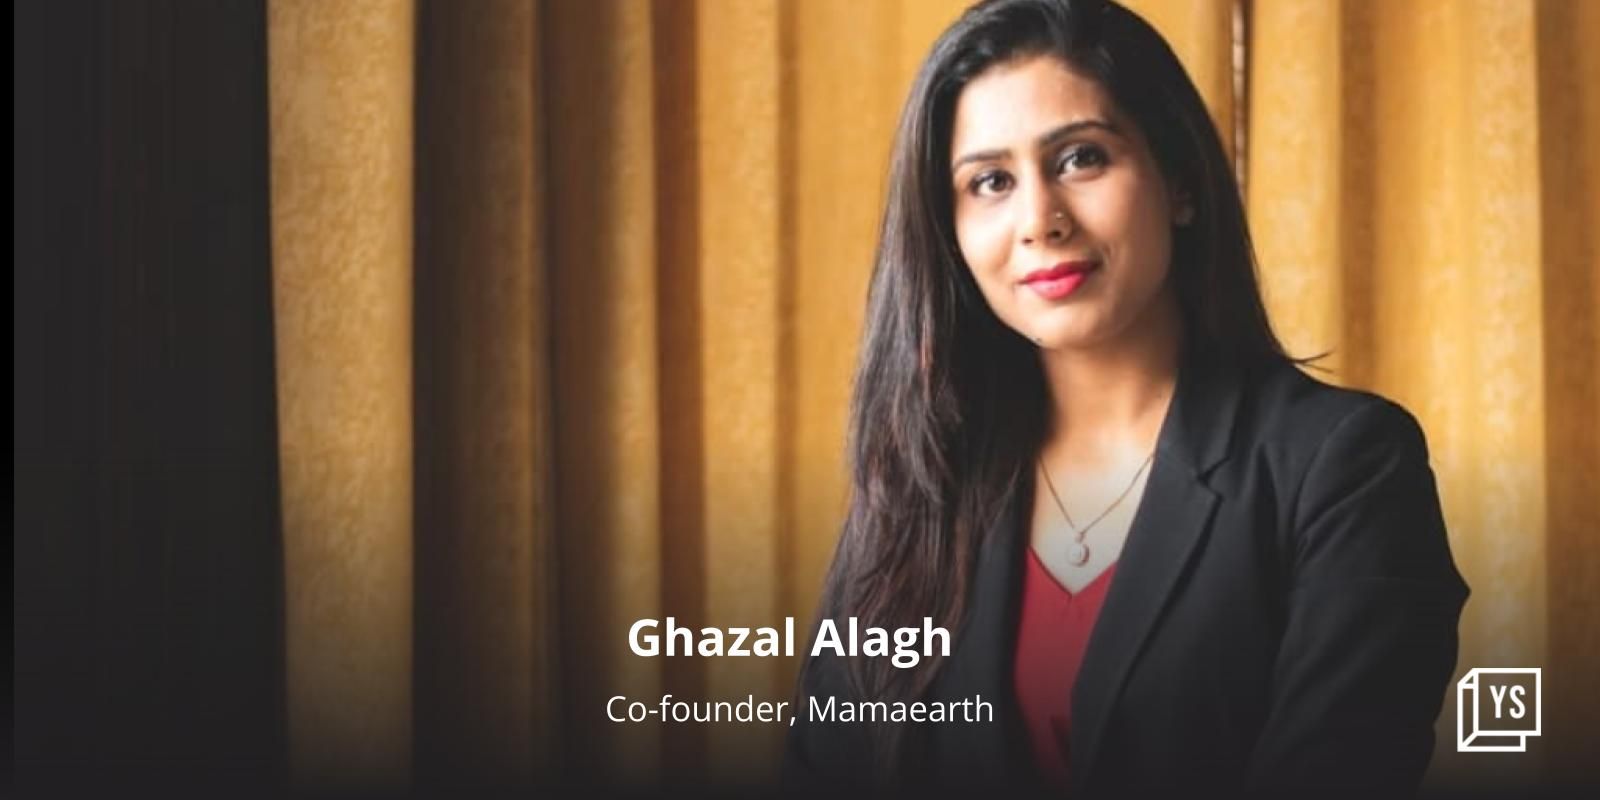 Mamaearth co-founder Ghazal Alagh clarifies on IPO valuation concerns